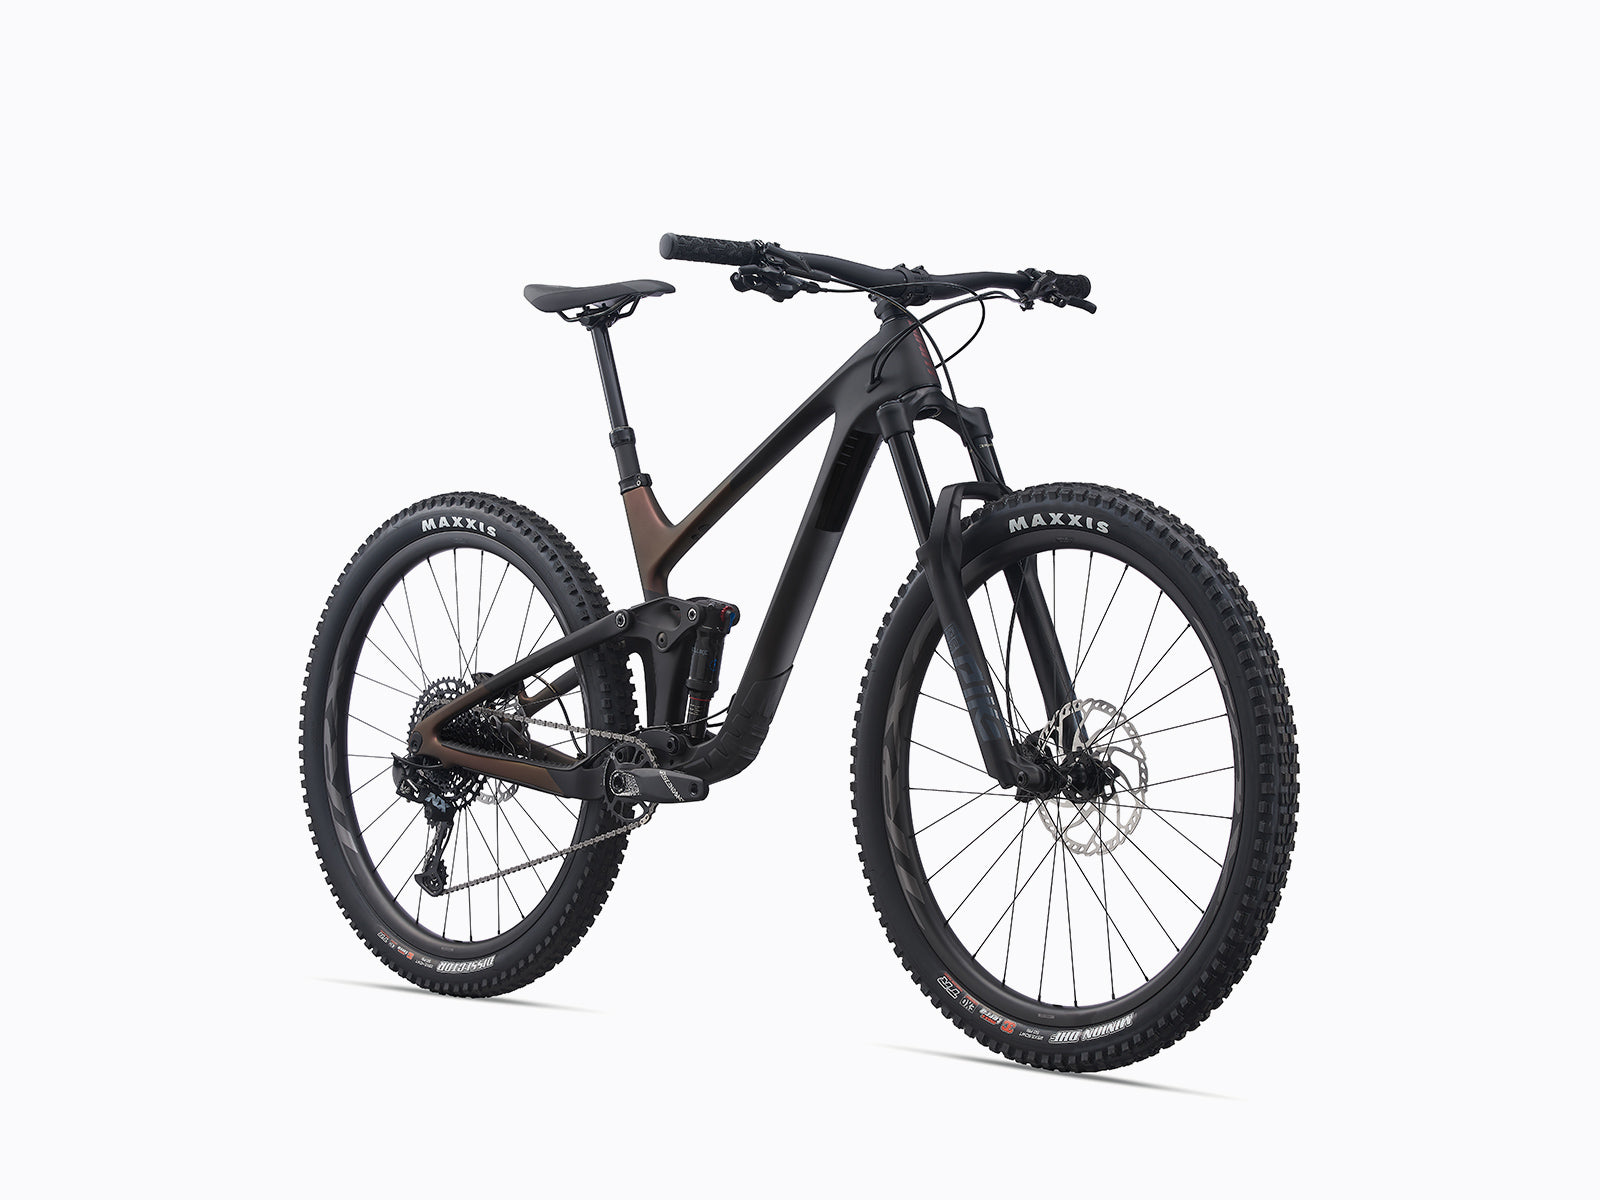 Image features a Giant Trance x advanced Pro 29 2, a full suspension mountain bike from giants trail bike collection